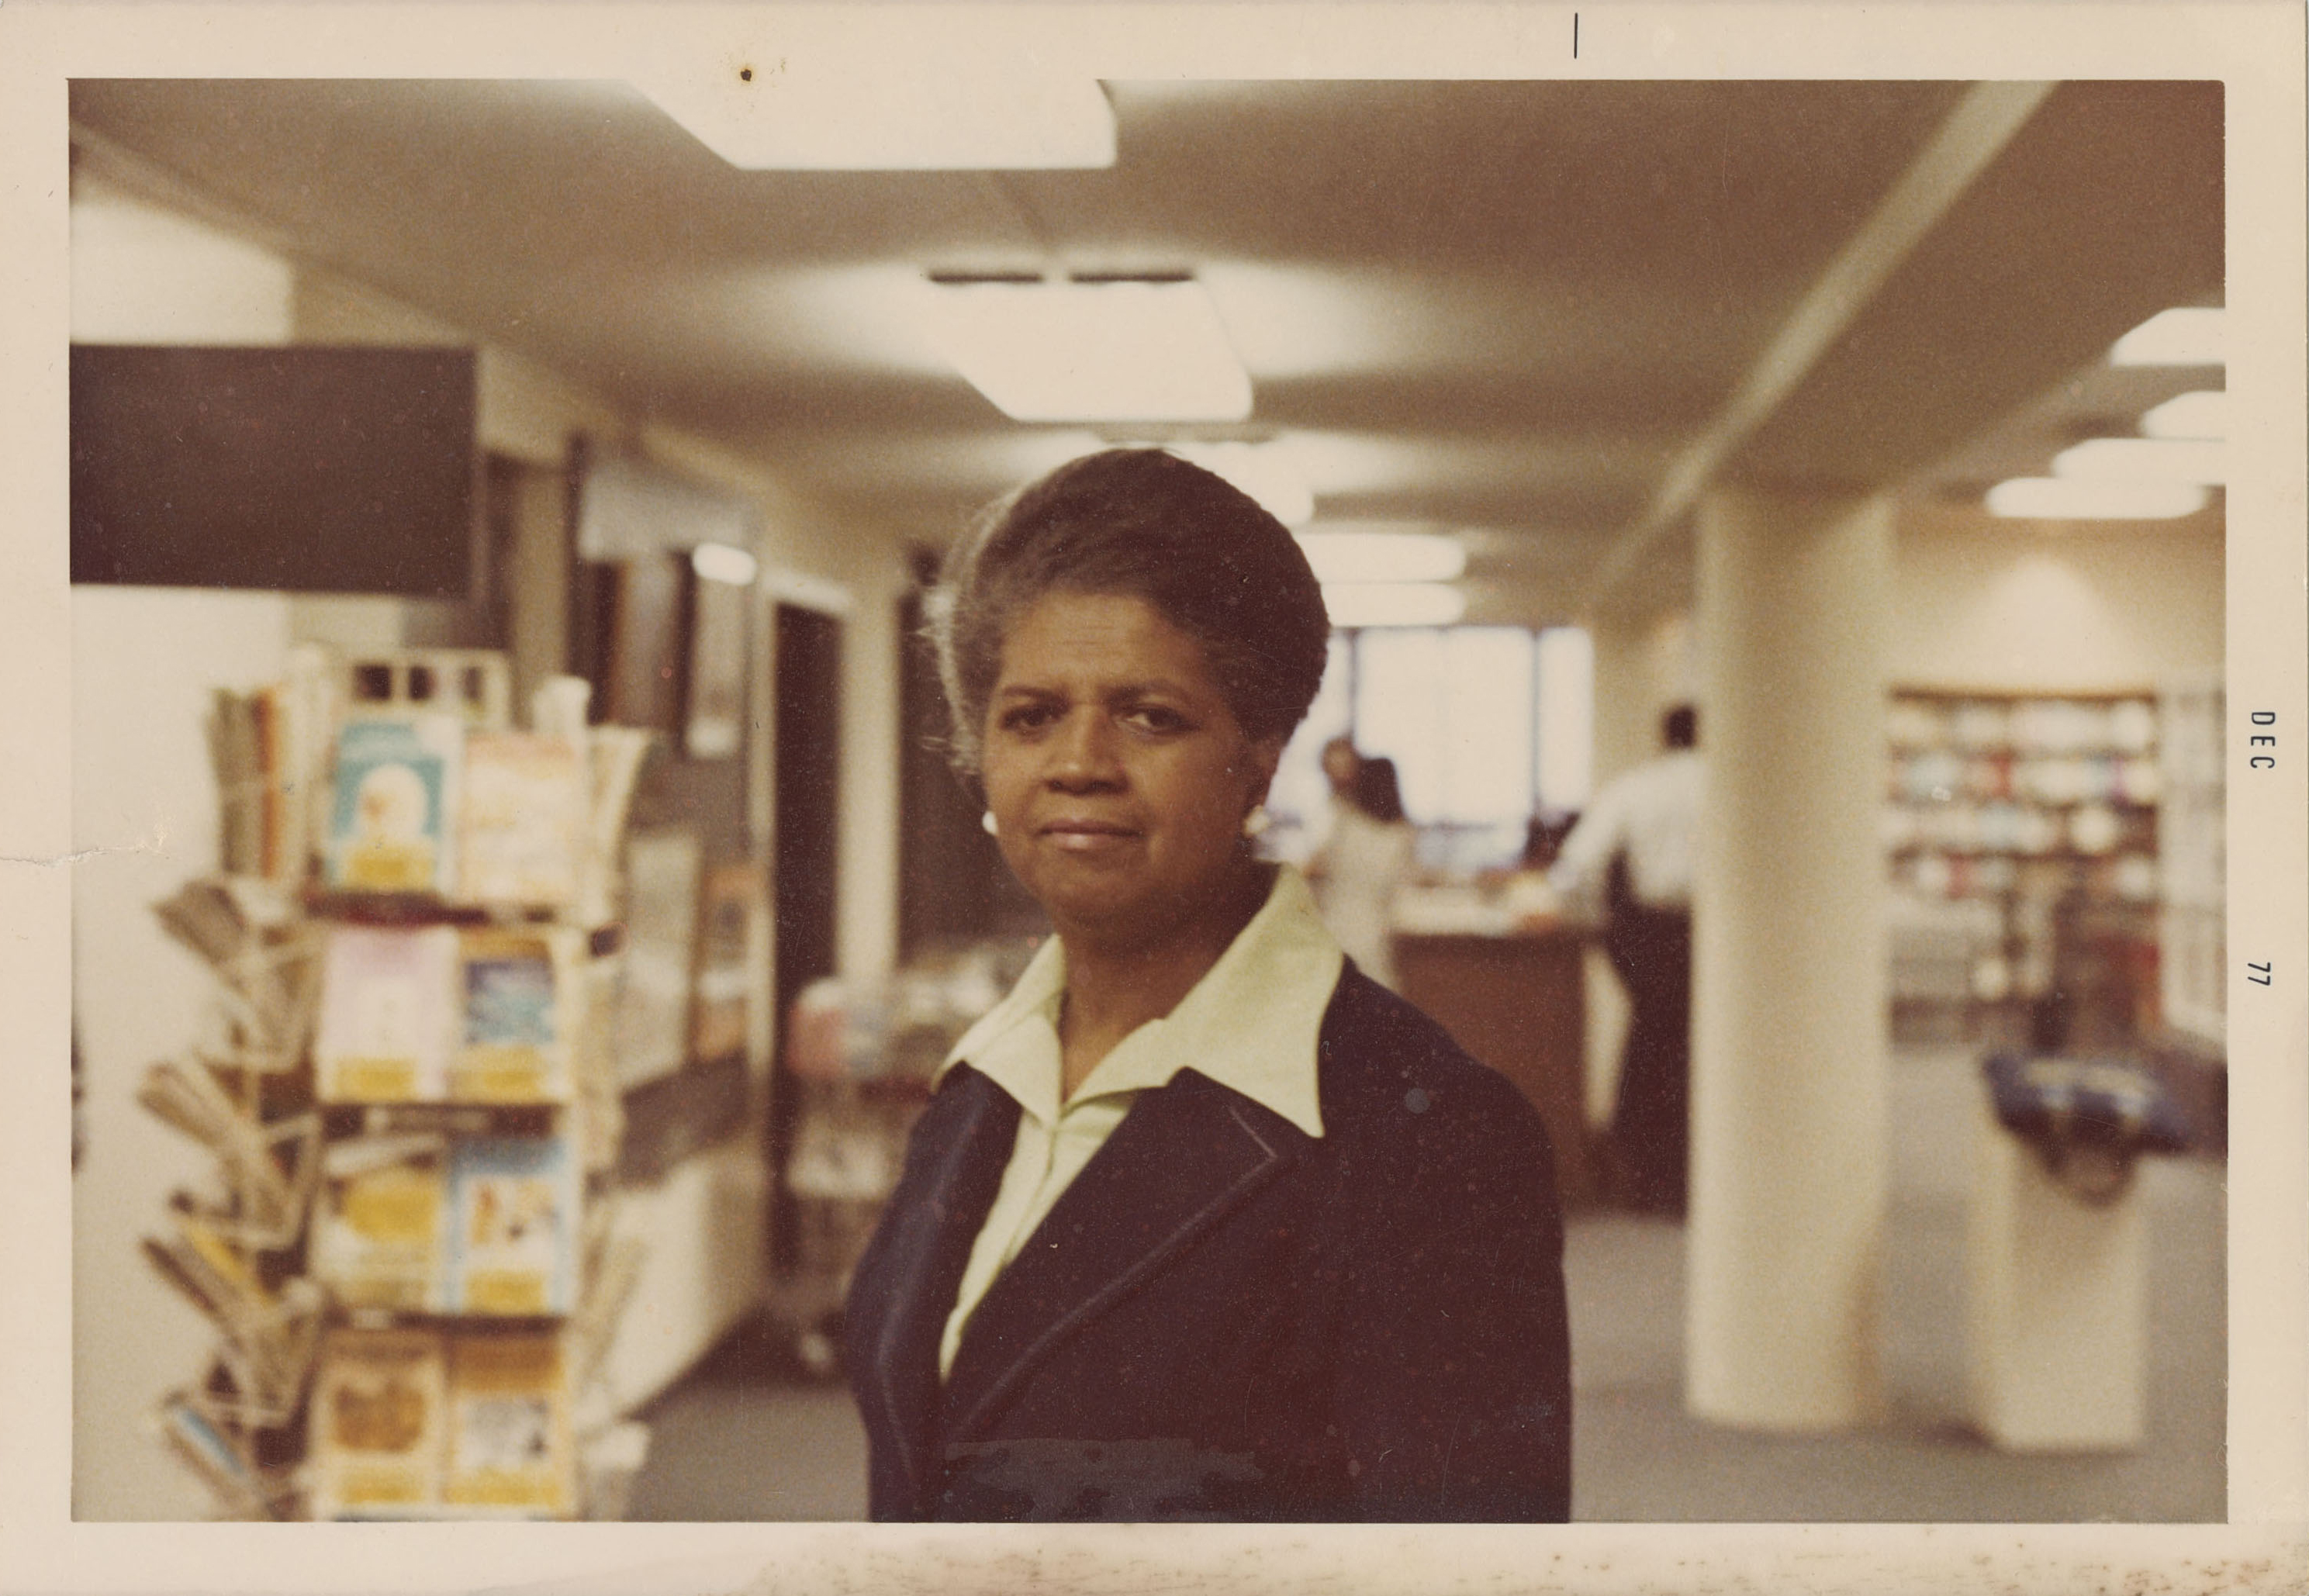 Ethel Bolden at Richland Library in Columbia, South Carolina